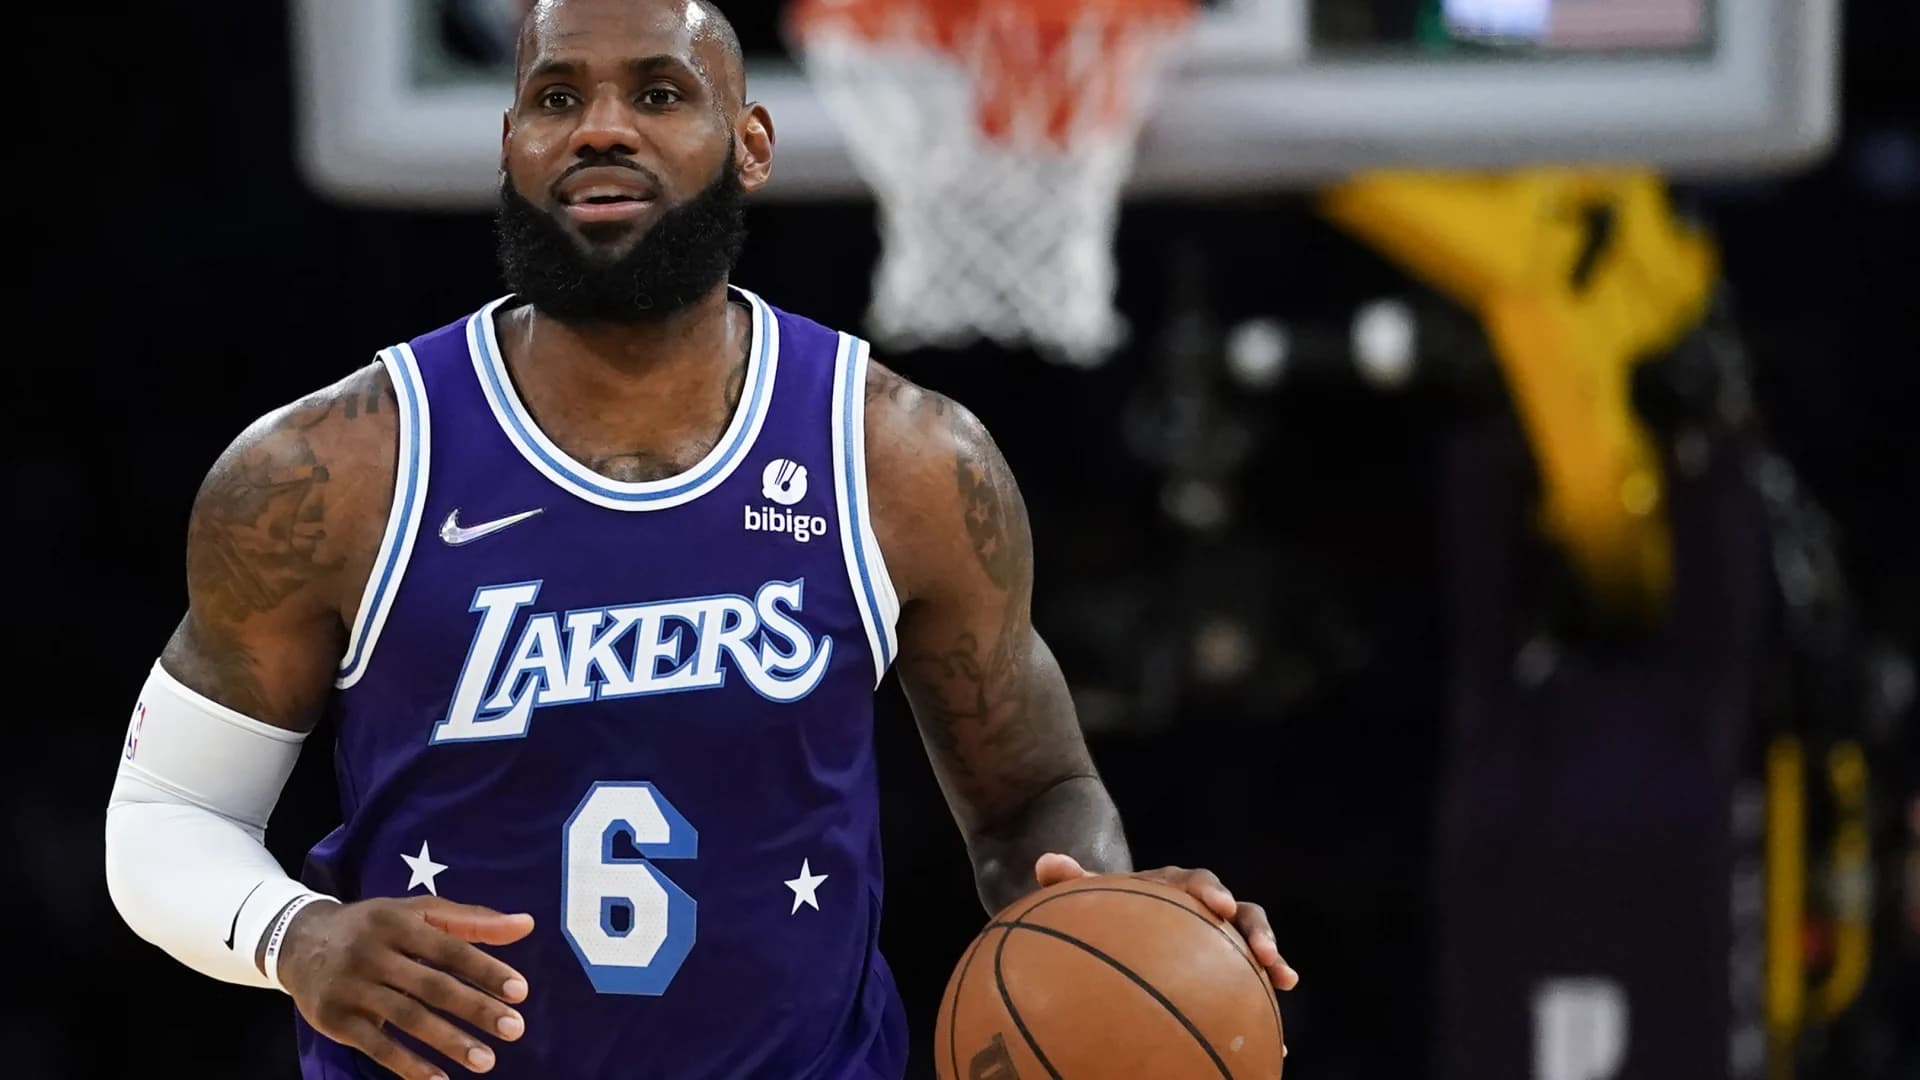 LeBron James inks 2-year, $97.1 million deal with Lakers